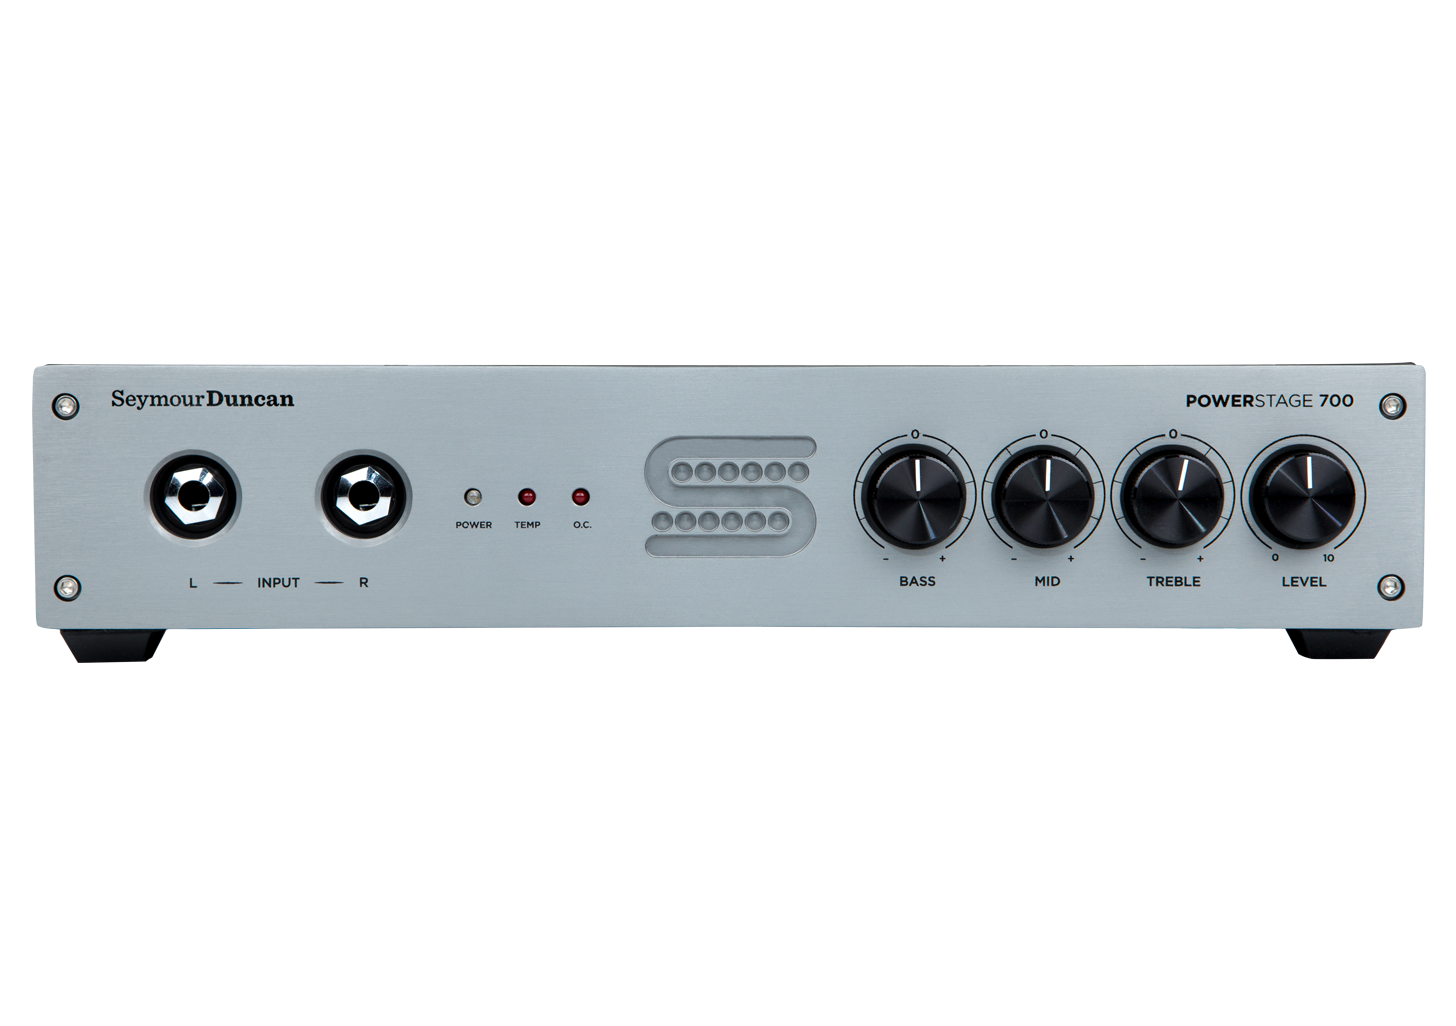 Seymour Duncan POWERSTAGE700 COMPACT POWER AMP